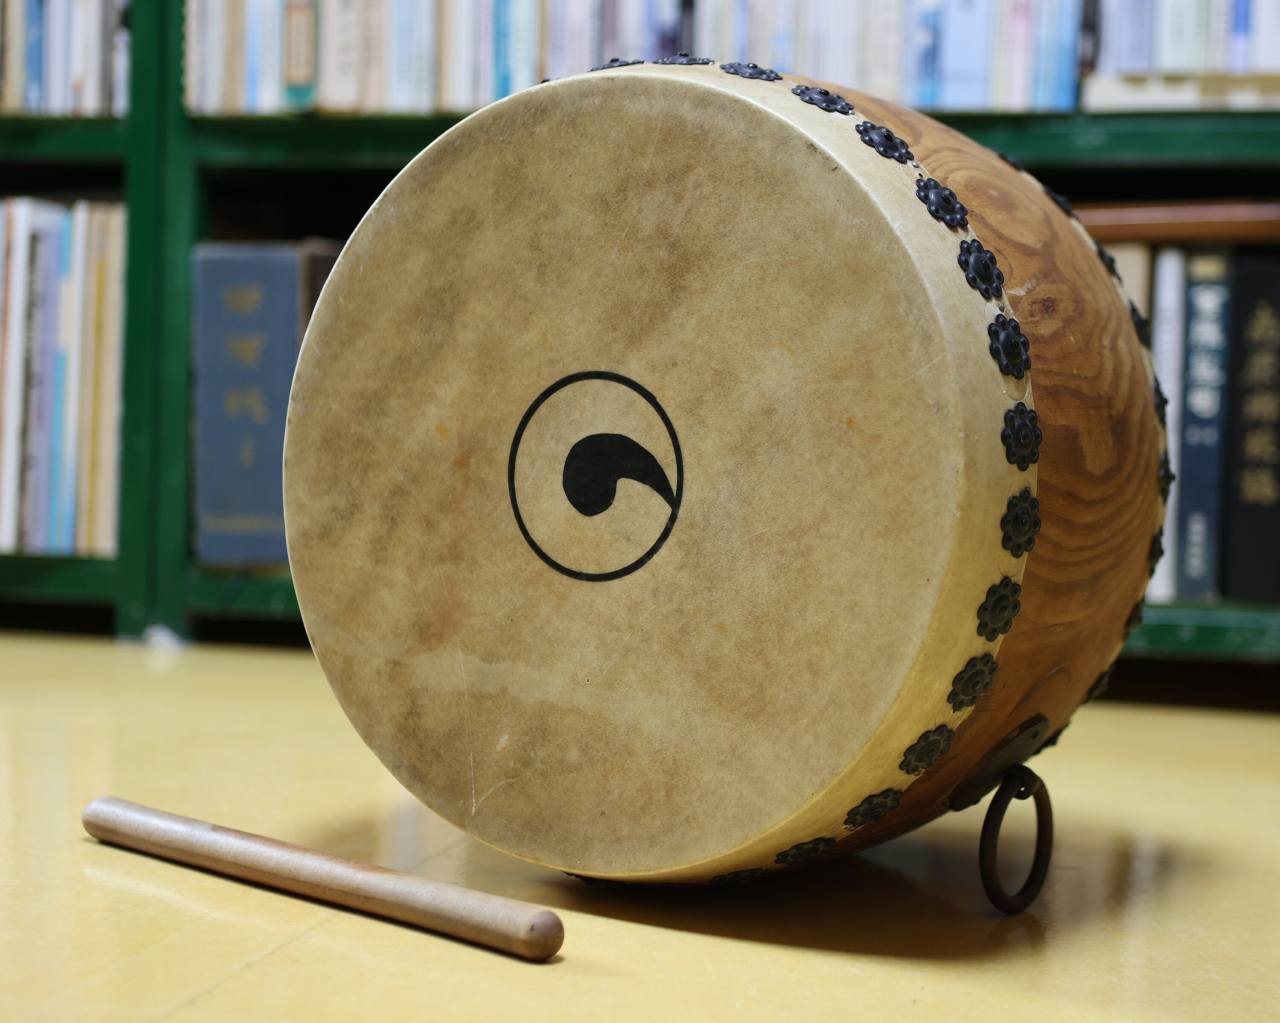 A pansori drum, which was custom made according to Joseon Dynasty specifications by Kim Yong-geun, director of Jirisan Cultural Resources Research Center in Namwon, North Jeolla Province. Photo © Hyungwon Kang